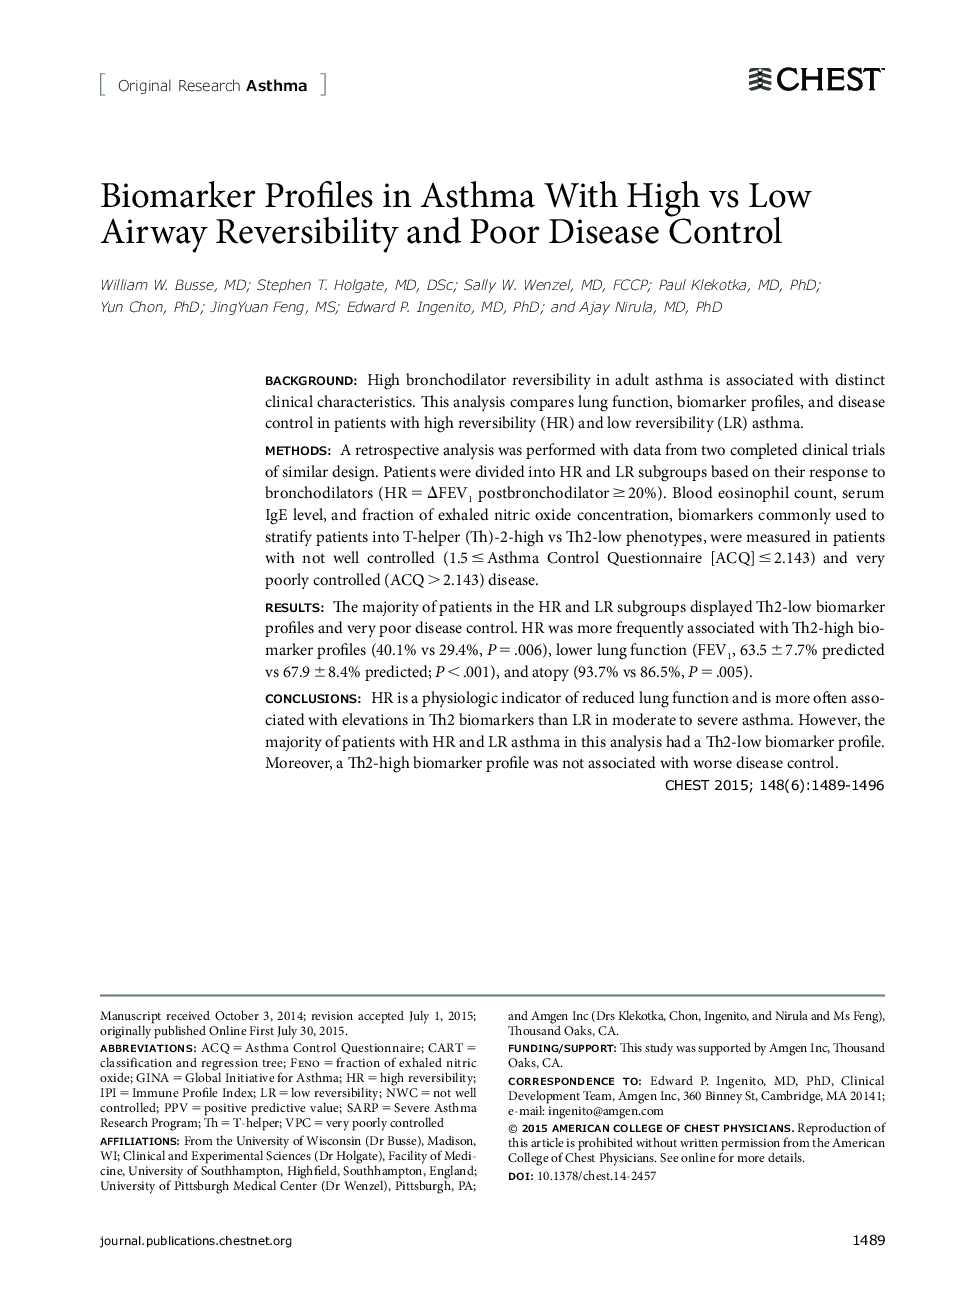 Biomarker Profiles in Asthma With High vs Low Airway Reversibility and Poor Disease Control